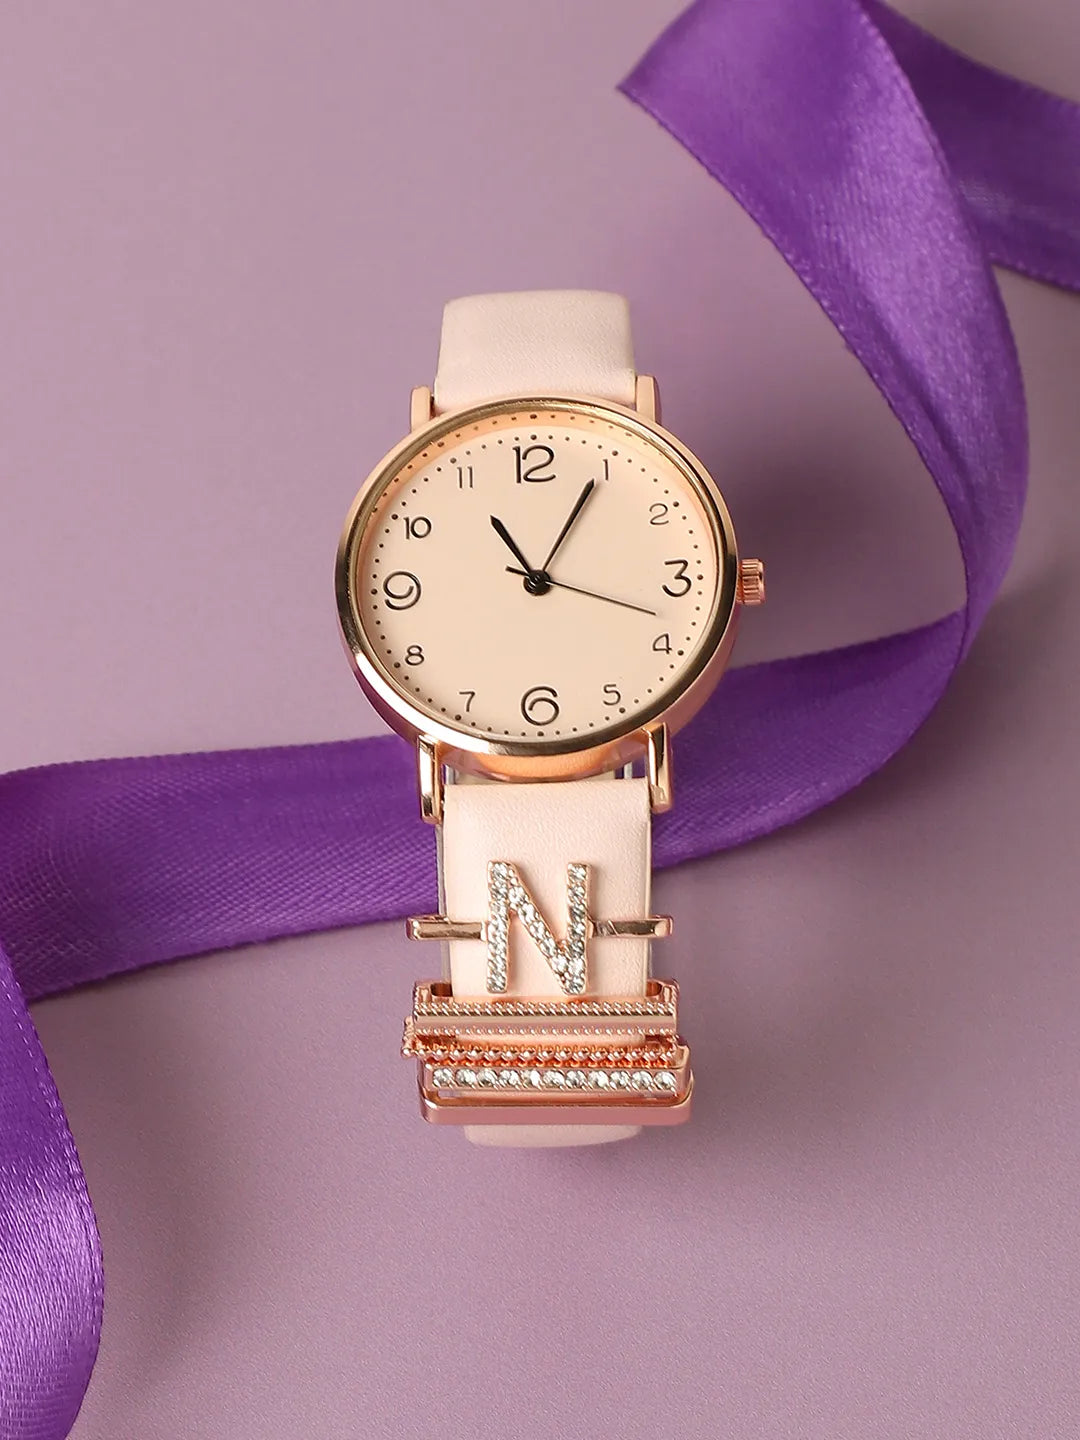 Round Analog Watch With N Initial Watch Charm - Dusty Pink